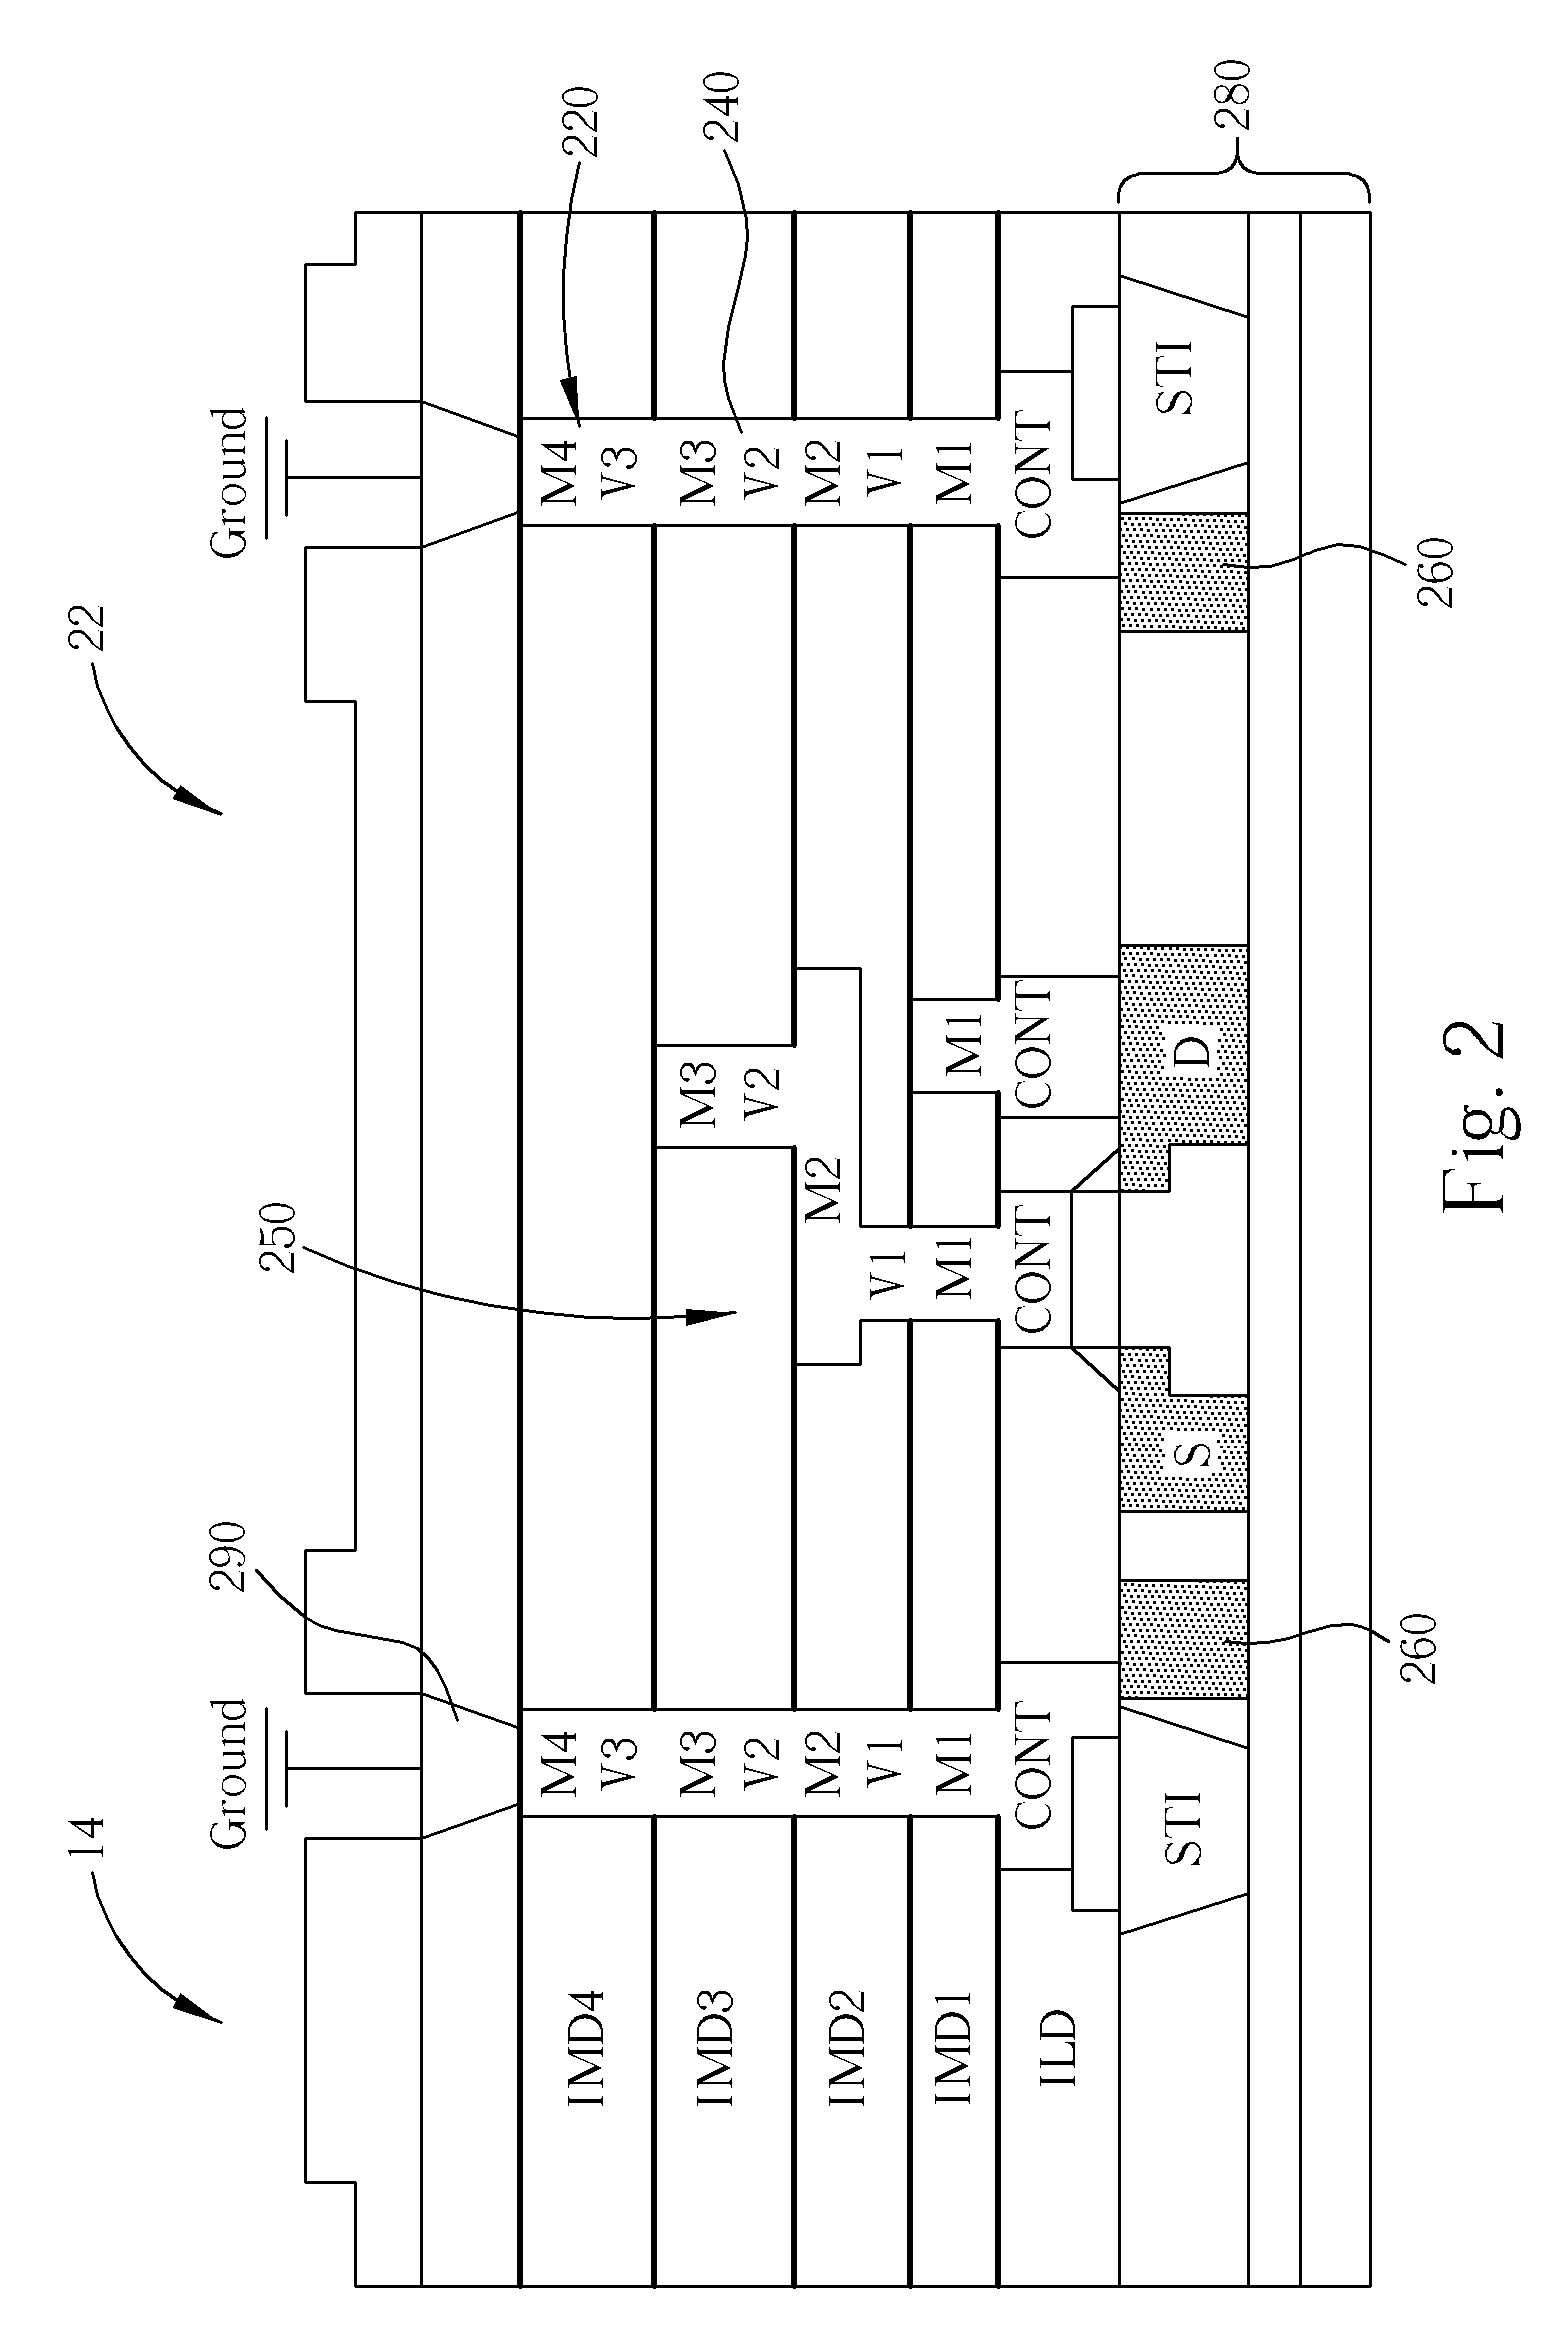 System-on-chip with shield rings for shielding functional blocks therein from electromagnetic interference